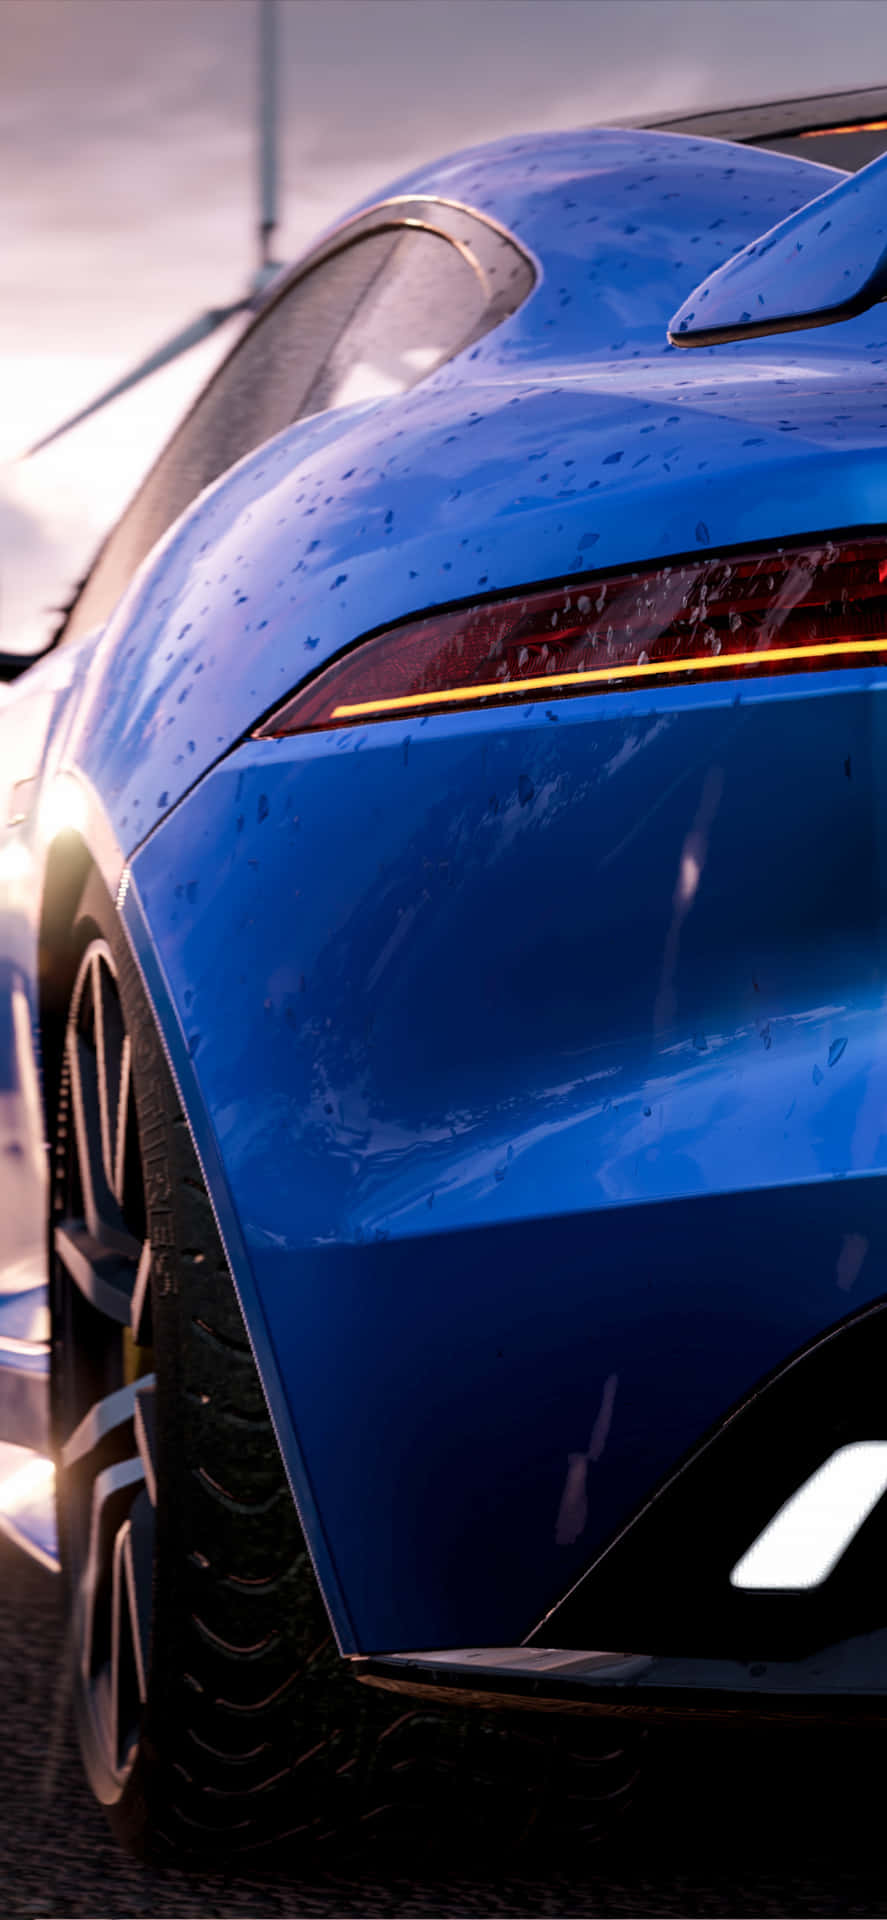 Iphone Xs Max Project Cars 2 Blue Jaguar F-type Background